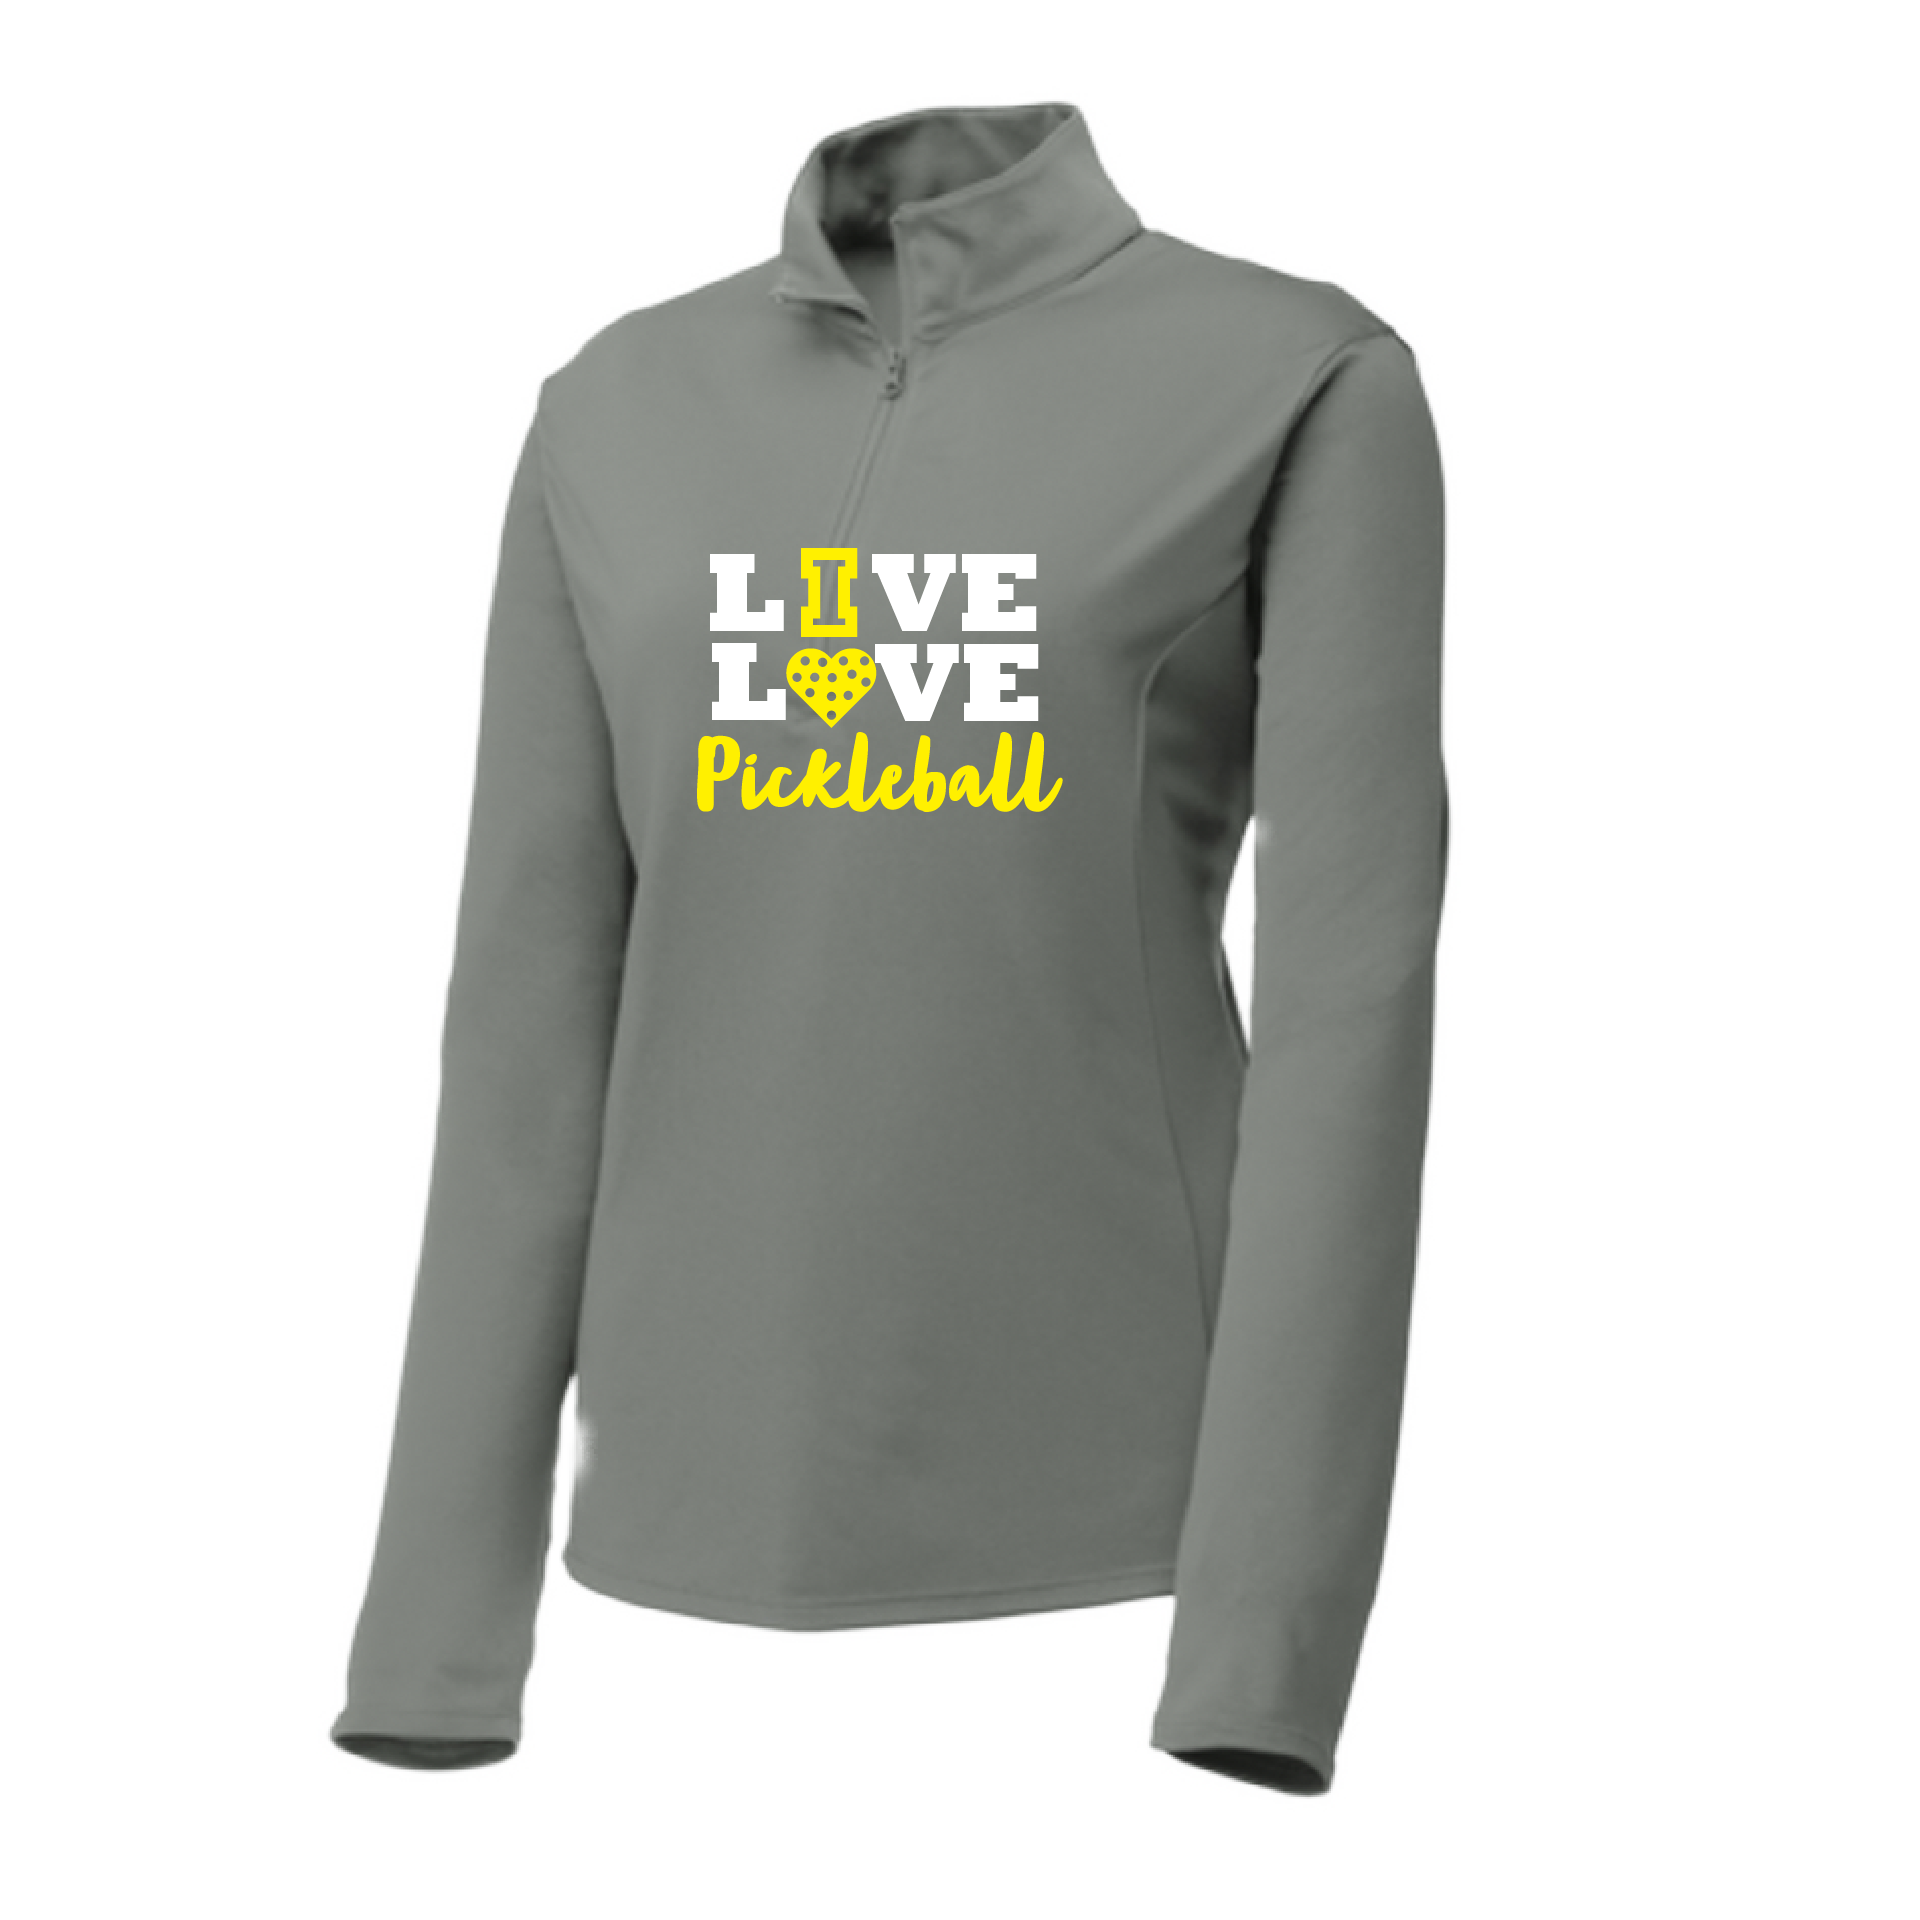 Pickleball Design: Live Love Pickleball  Women's 1/4-Zip Pullover:  Princess seams and drop tail hem.  Turn up the volume in this Women's shirt with its perfect mix of softness and attitude. Material is ultra-comfortable with moisture wicking properties and tri-blend softness. PosiCharge technology locks in color. Highly breathable and lightweight. Versatile enough for wearing year-round.